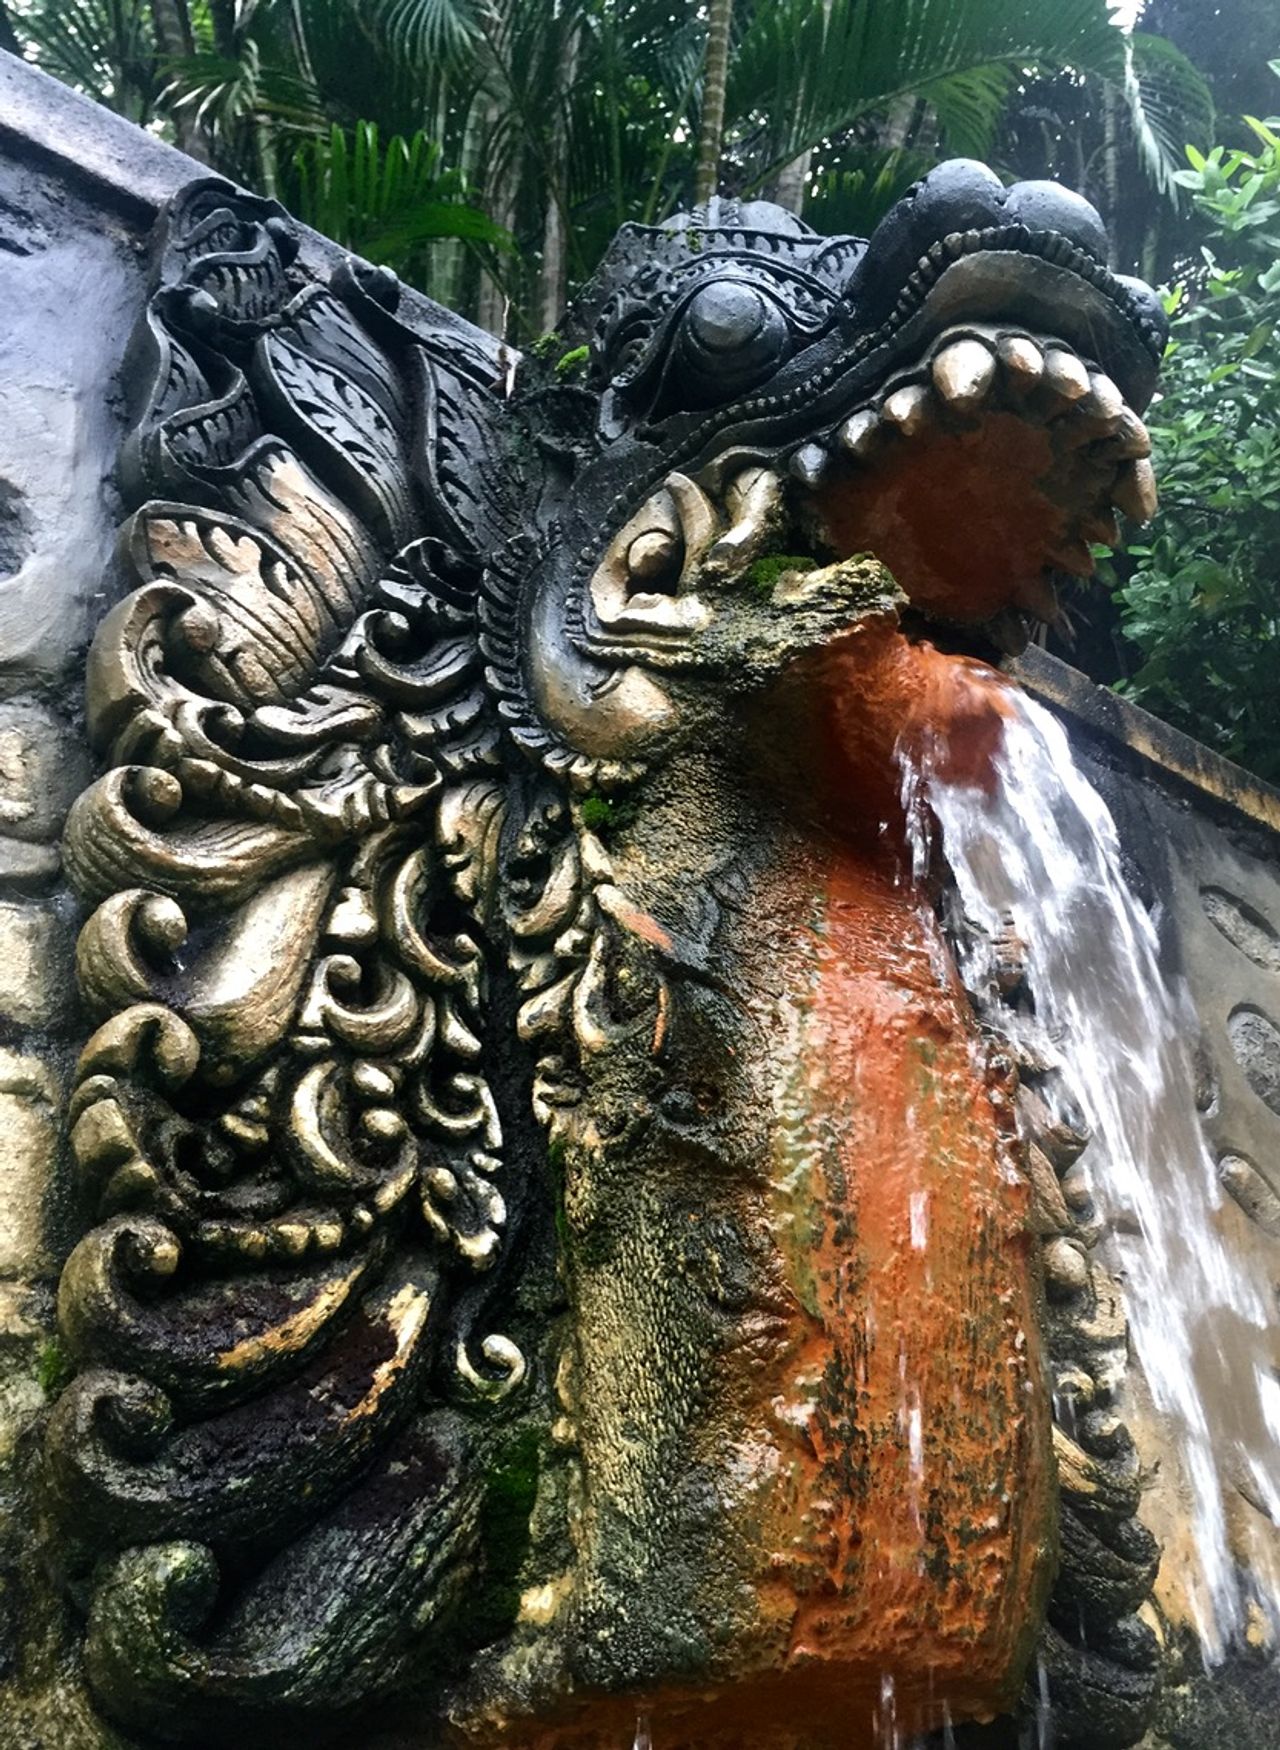 An ornate stone carving of a dragon with water flowing out of the mouth.